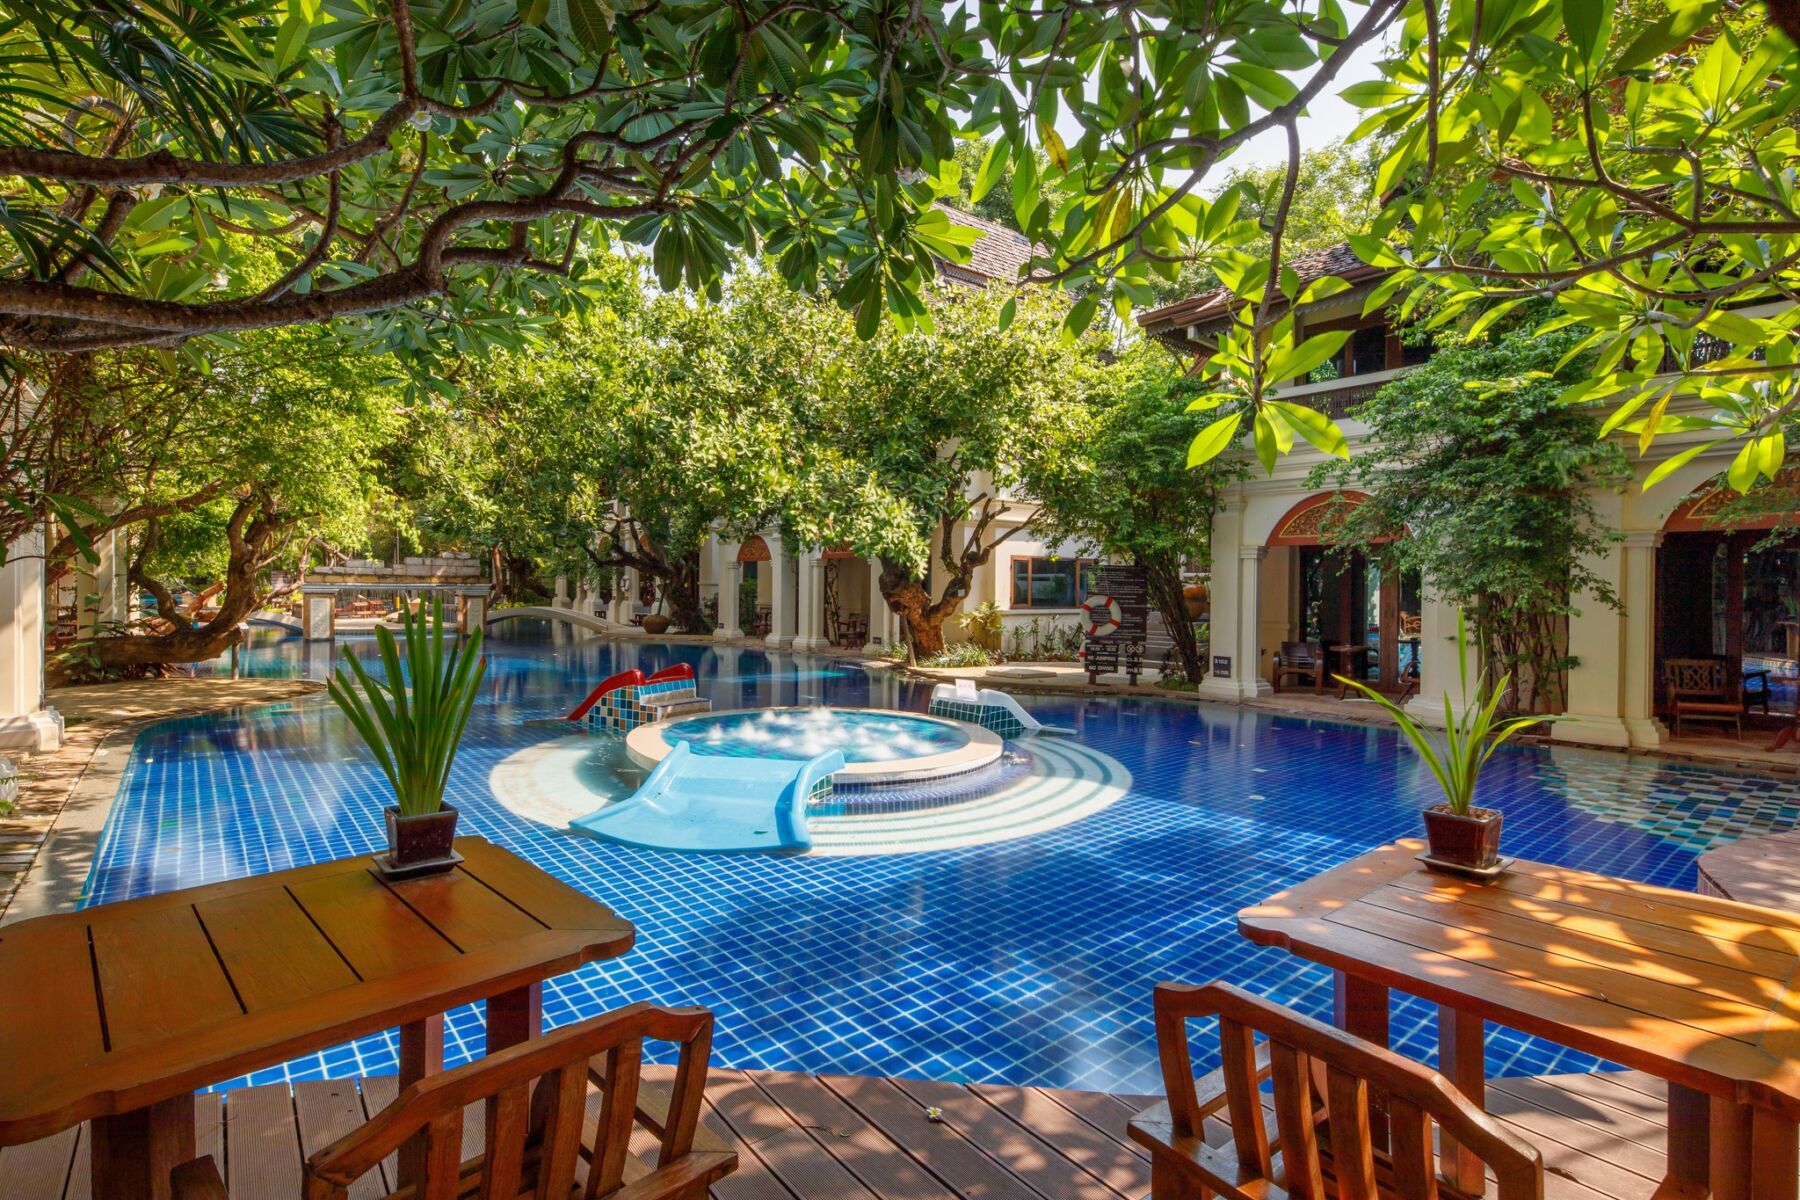 City Guide: Top 5 hotels for families in Chiang Mai 2023 | News by Thaiger